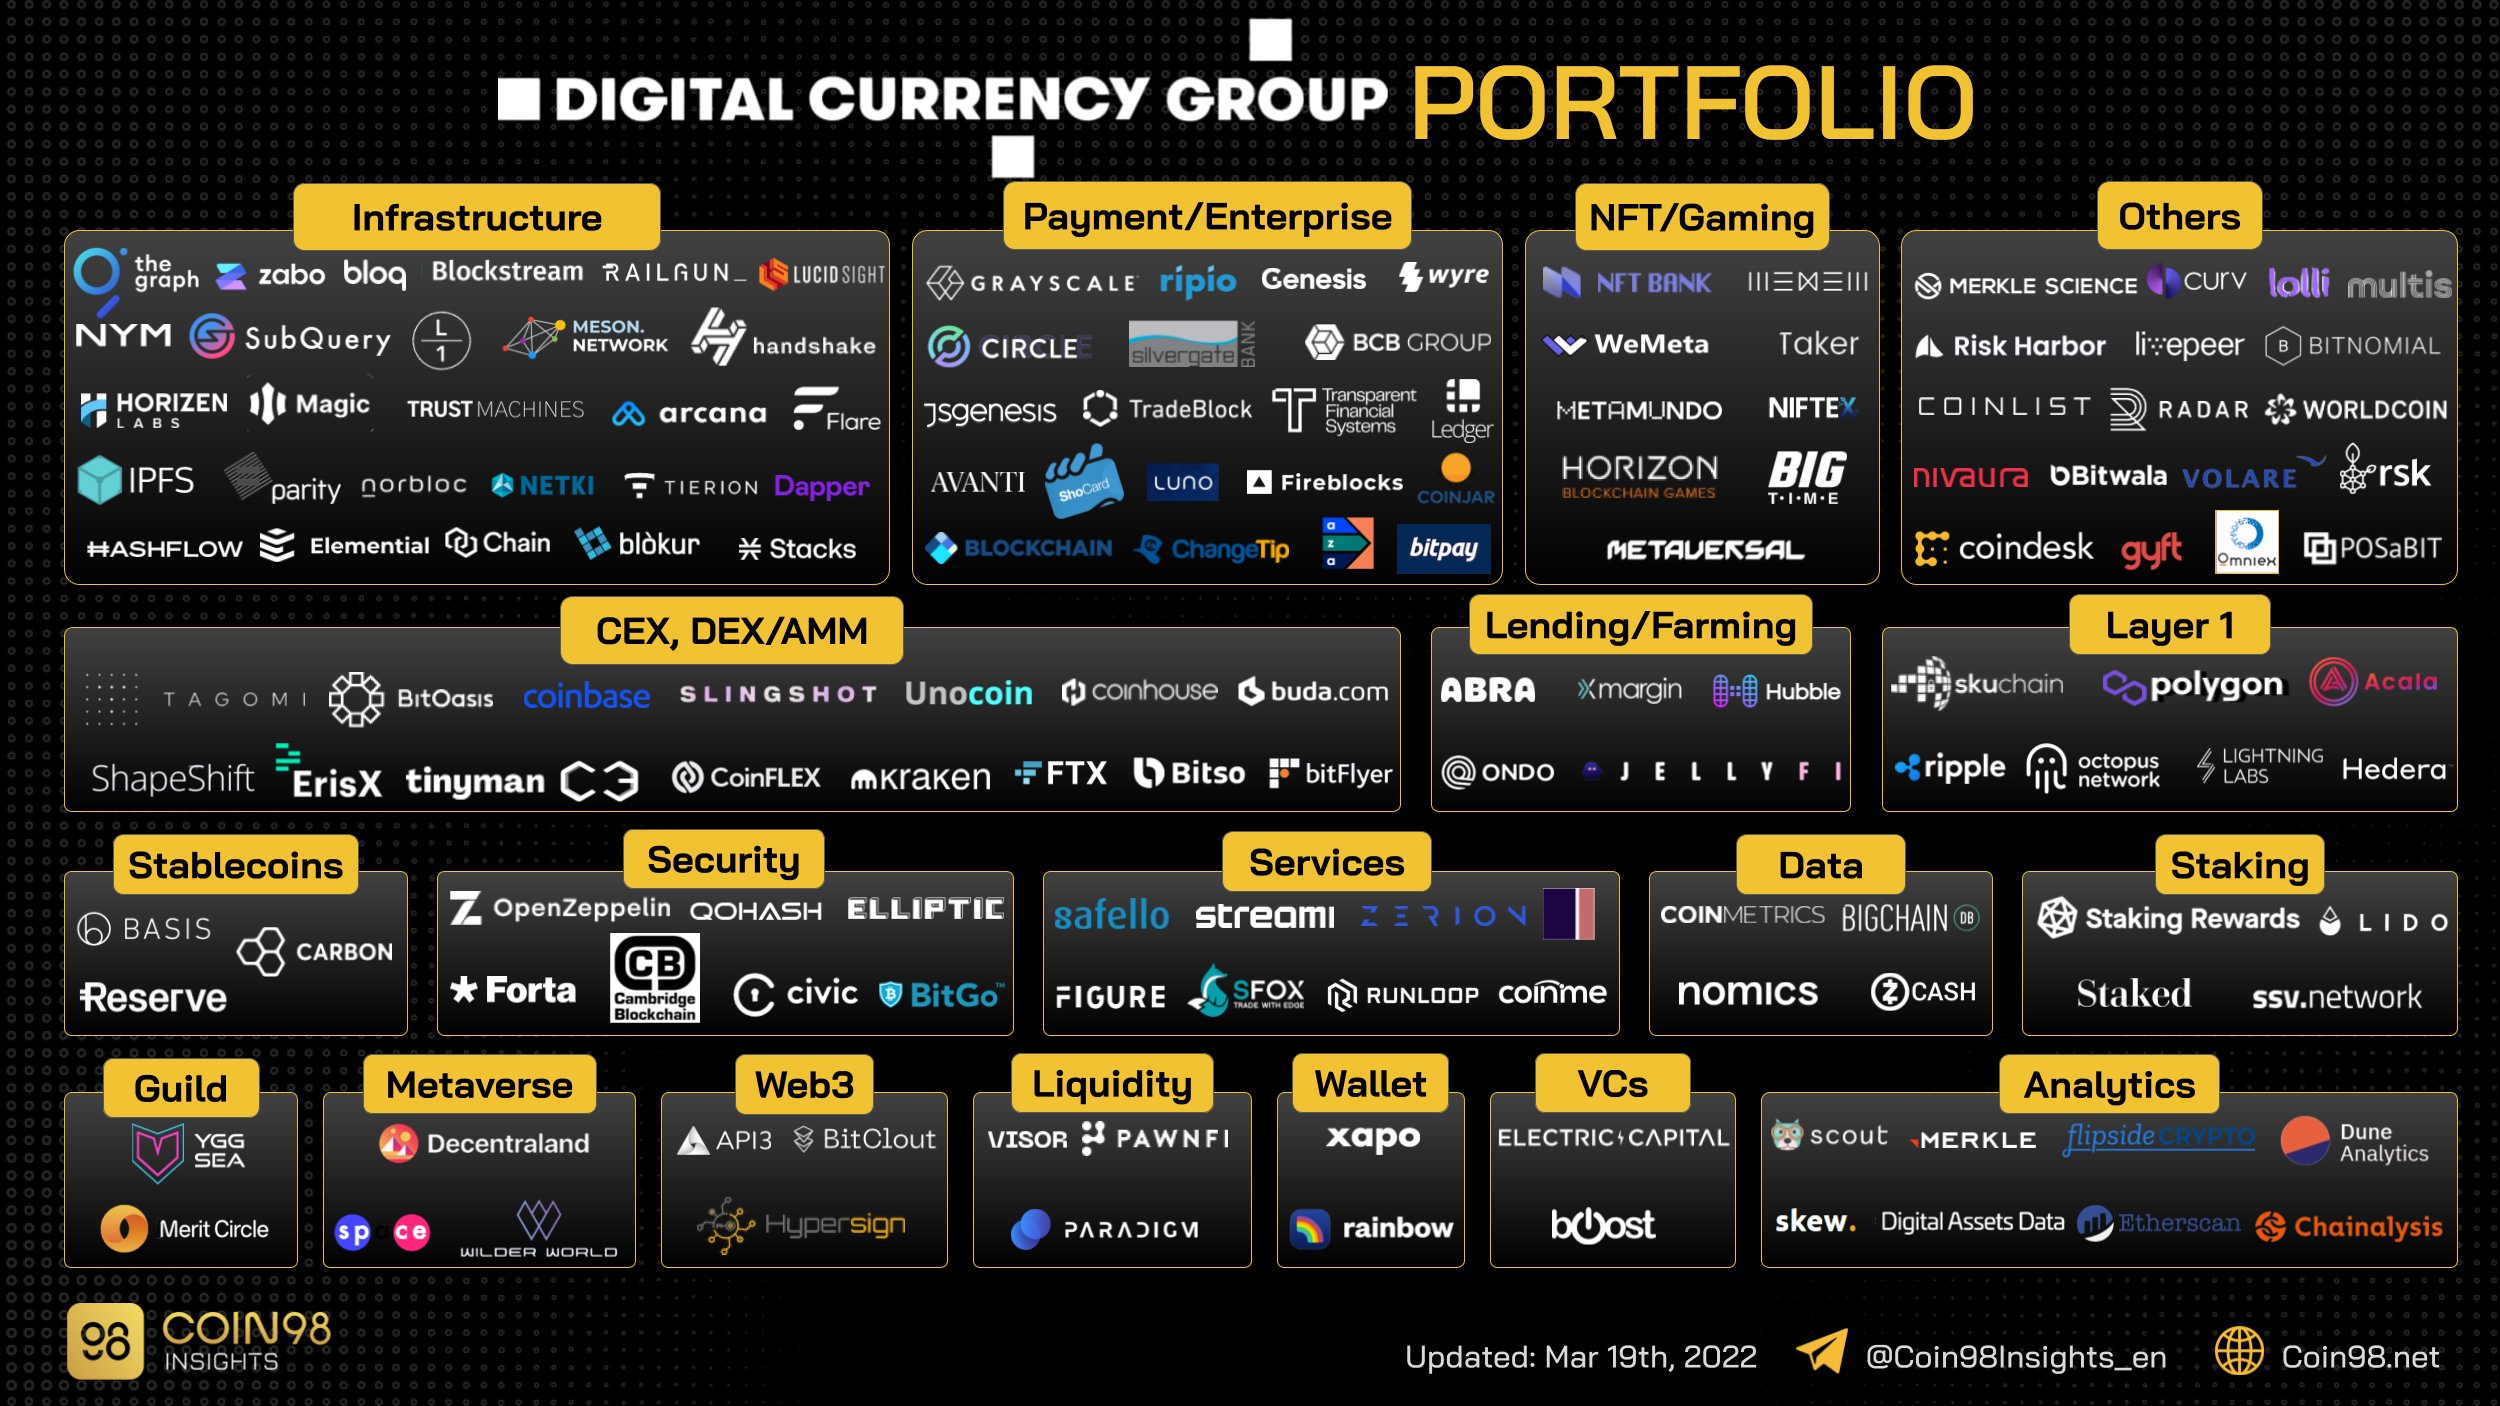 Coin98 Insights Digital Currency Group Portfolio